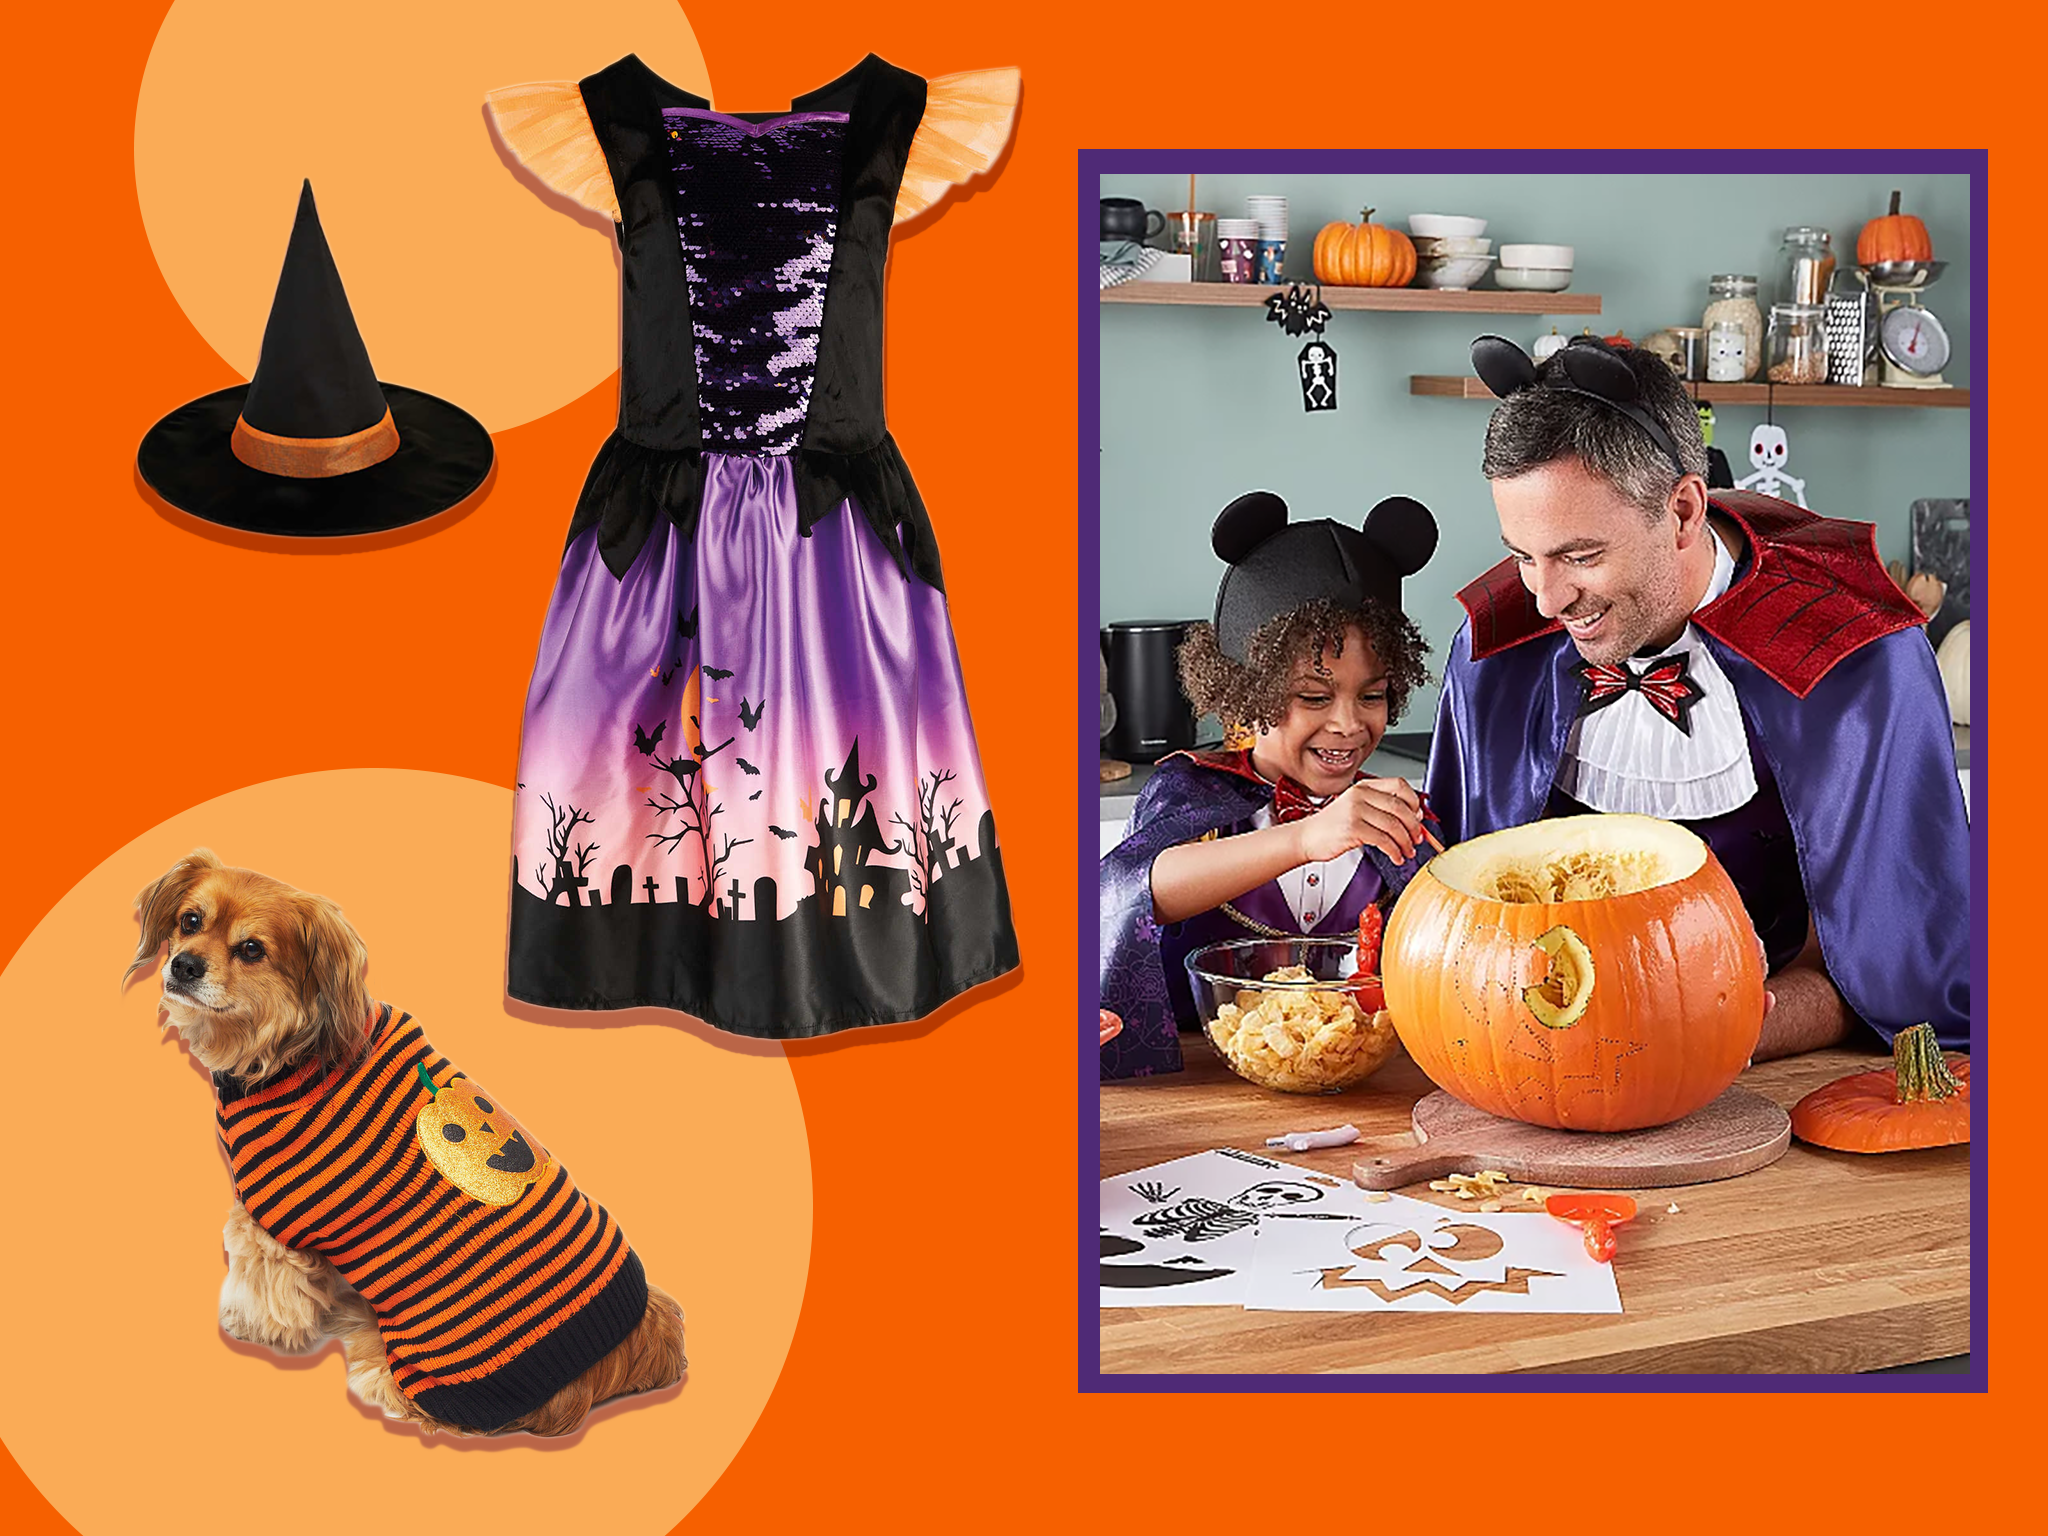 Cheap Halloween costumes for kids and adults Aldi, Amazon and more The Independent image photo image